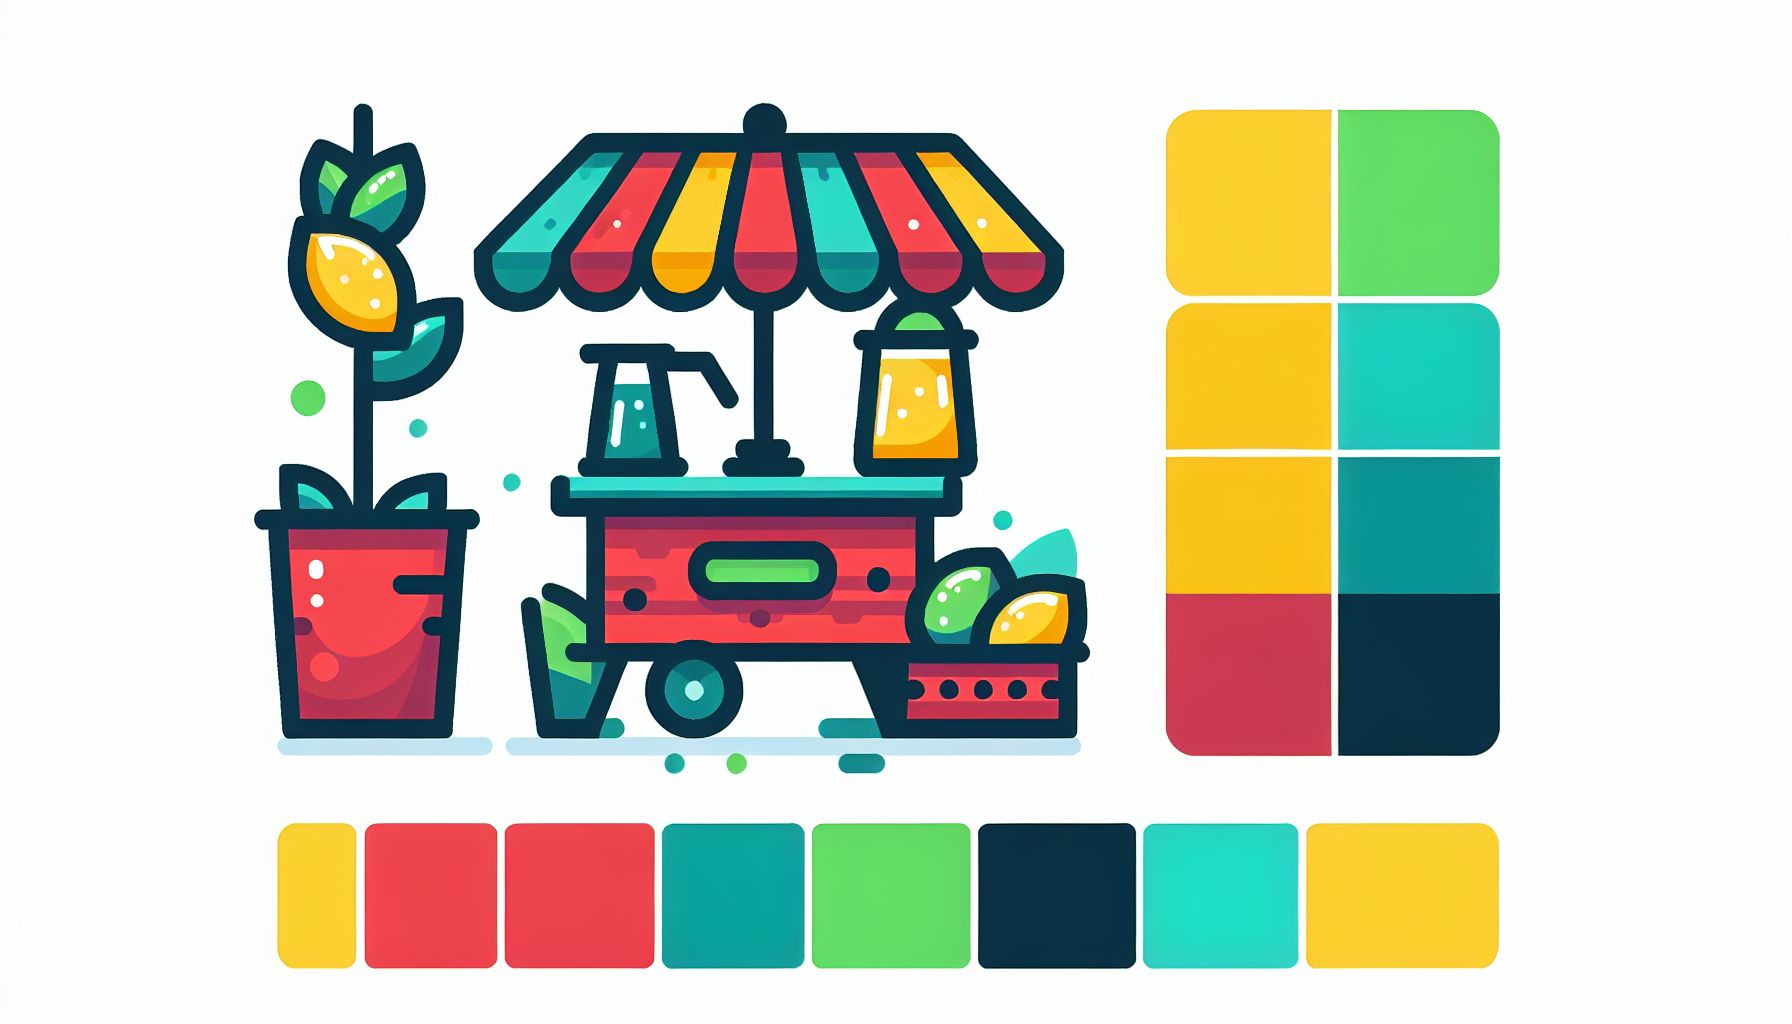 Lemonade stand in flat illustration style and white background, red #f47574, green #88c7a8, yellow #fcc44b, and blue #645bc8 colors.